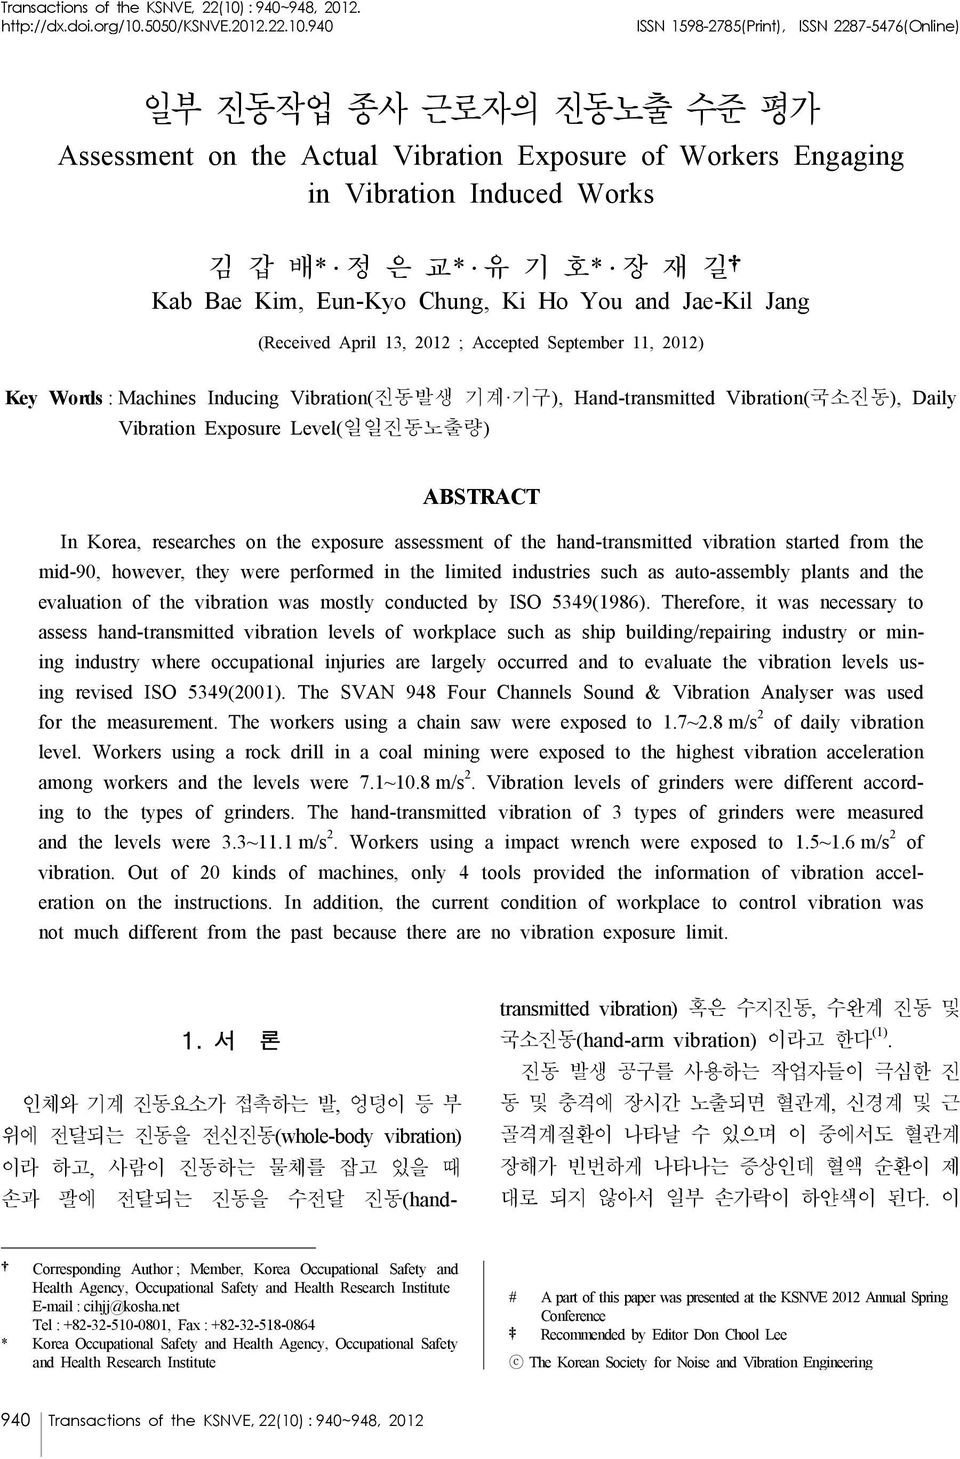 940 ISSN 1598-2785(Print), ISSN 2287-5476(Online) 일부 진동작업 종사 근로자의 진동노출 수준 평가 Assessment on the Actual Vibration Exposure of Workers Engaging in Vibration Induced Works 김 갑 배* 정 은 교* 유 기 호* 장 재 길 Kab